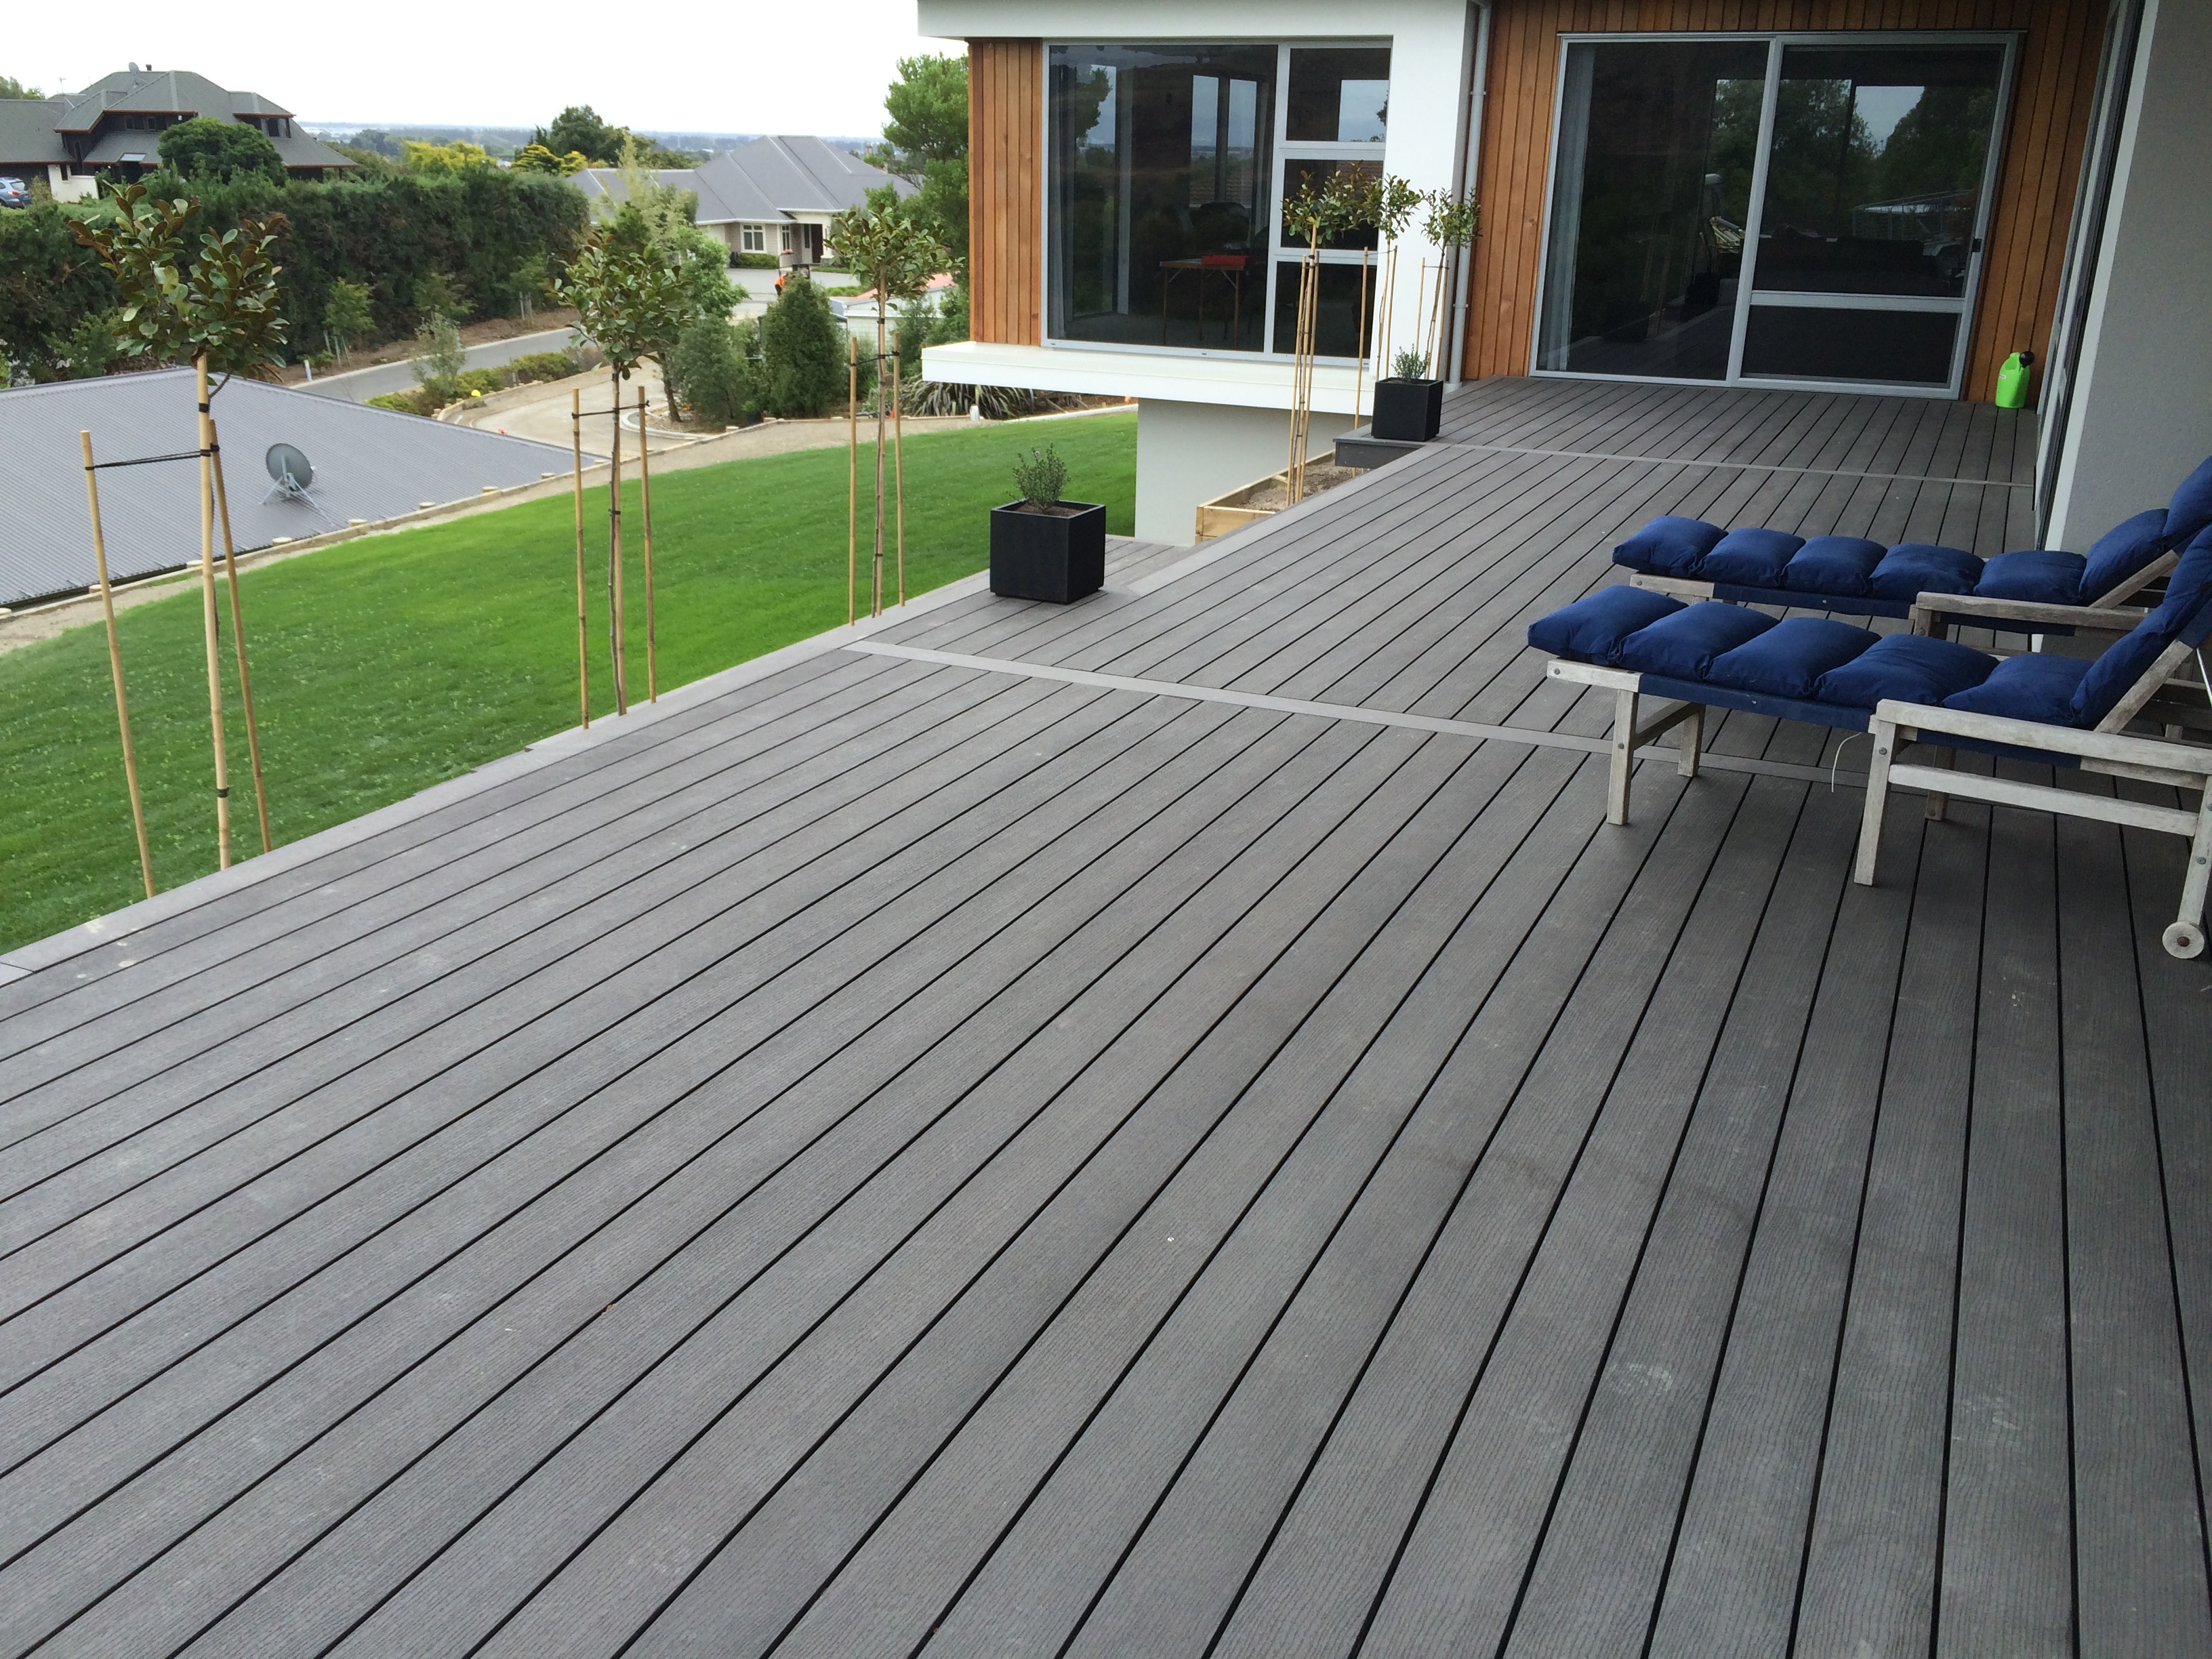 Low Maintenance Composite Decking For Your Home Futurewood